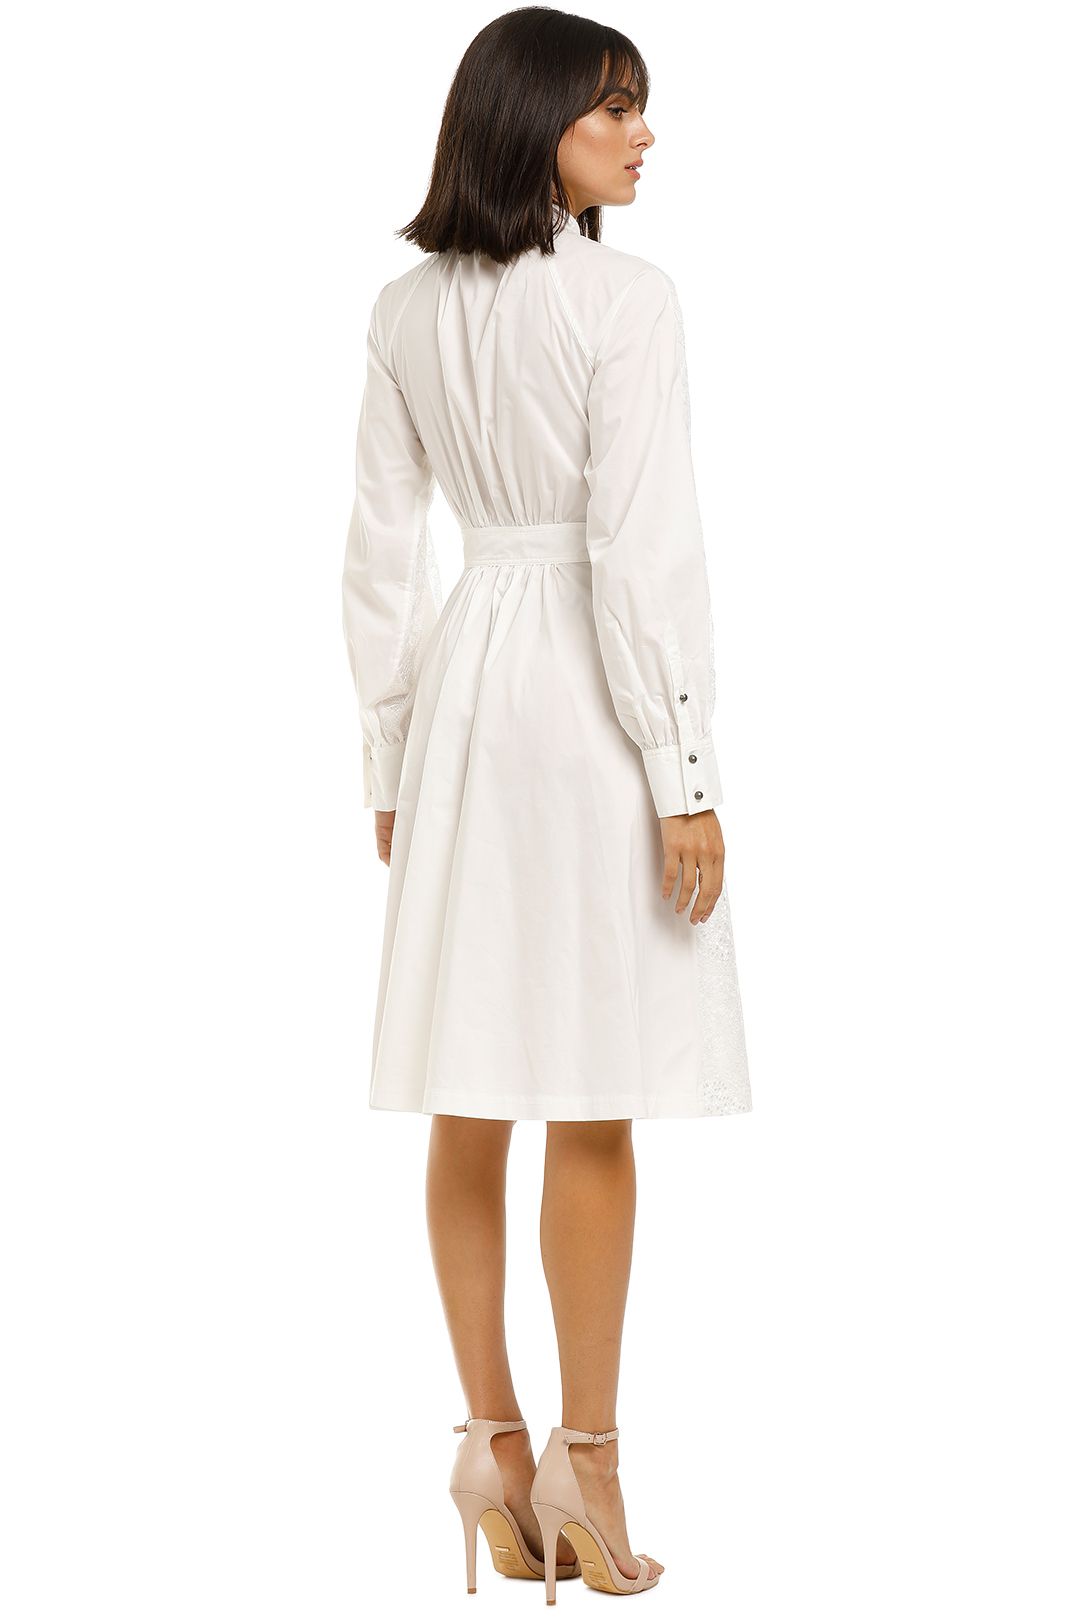 Leo-and-Lin-Serenity-Lace-Shirt-Dress-White-Back